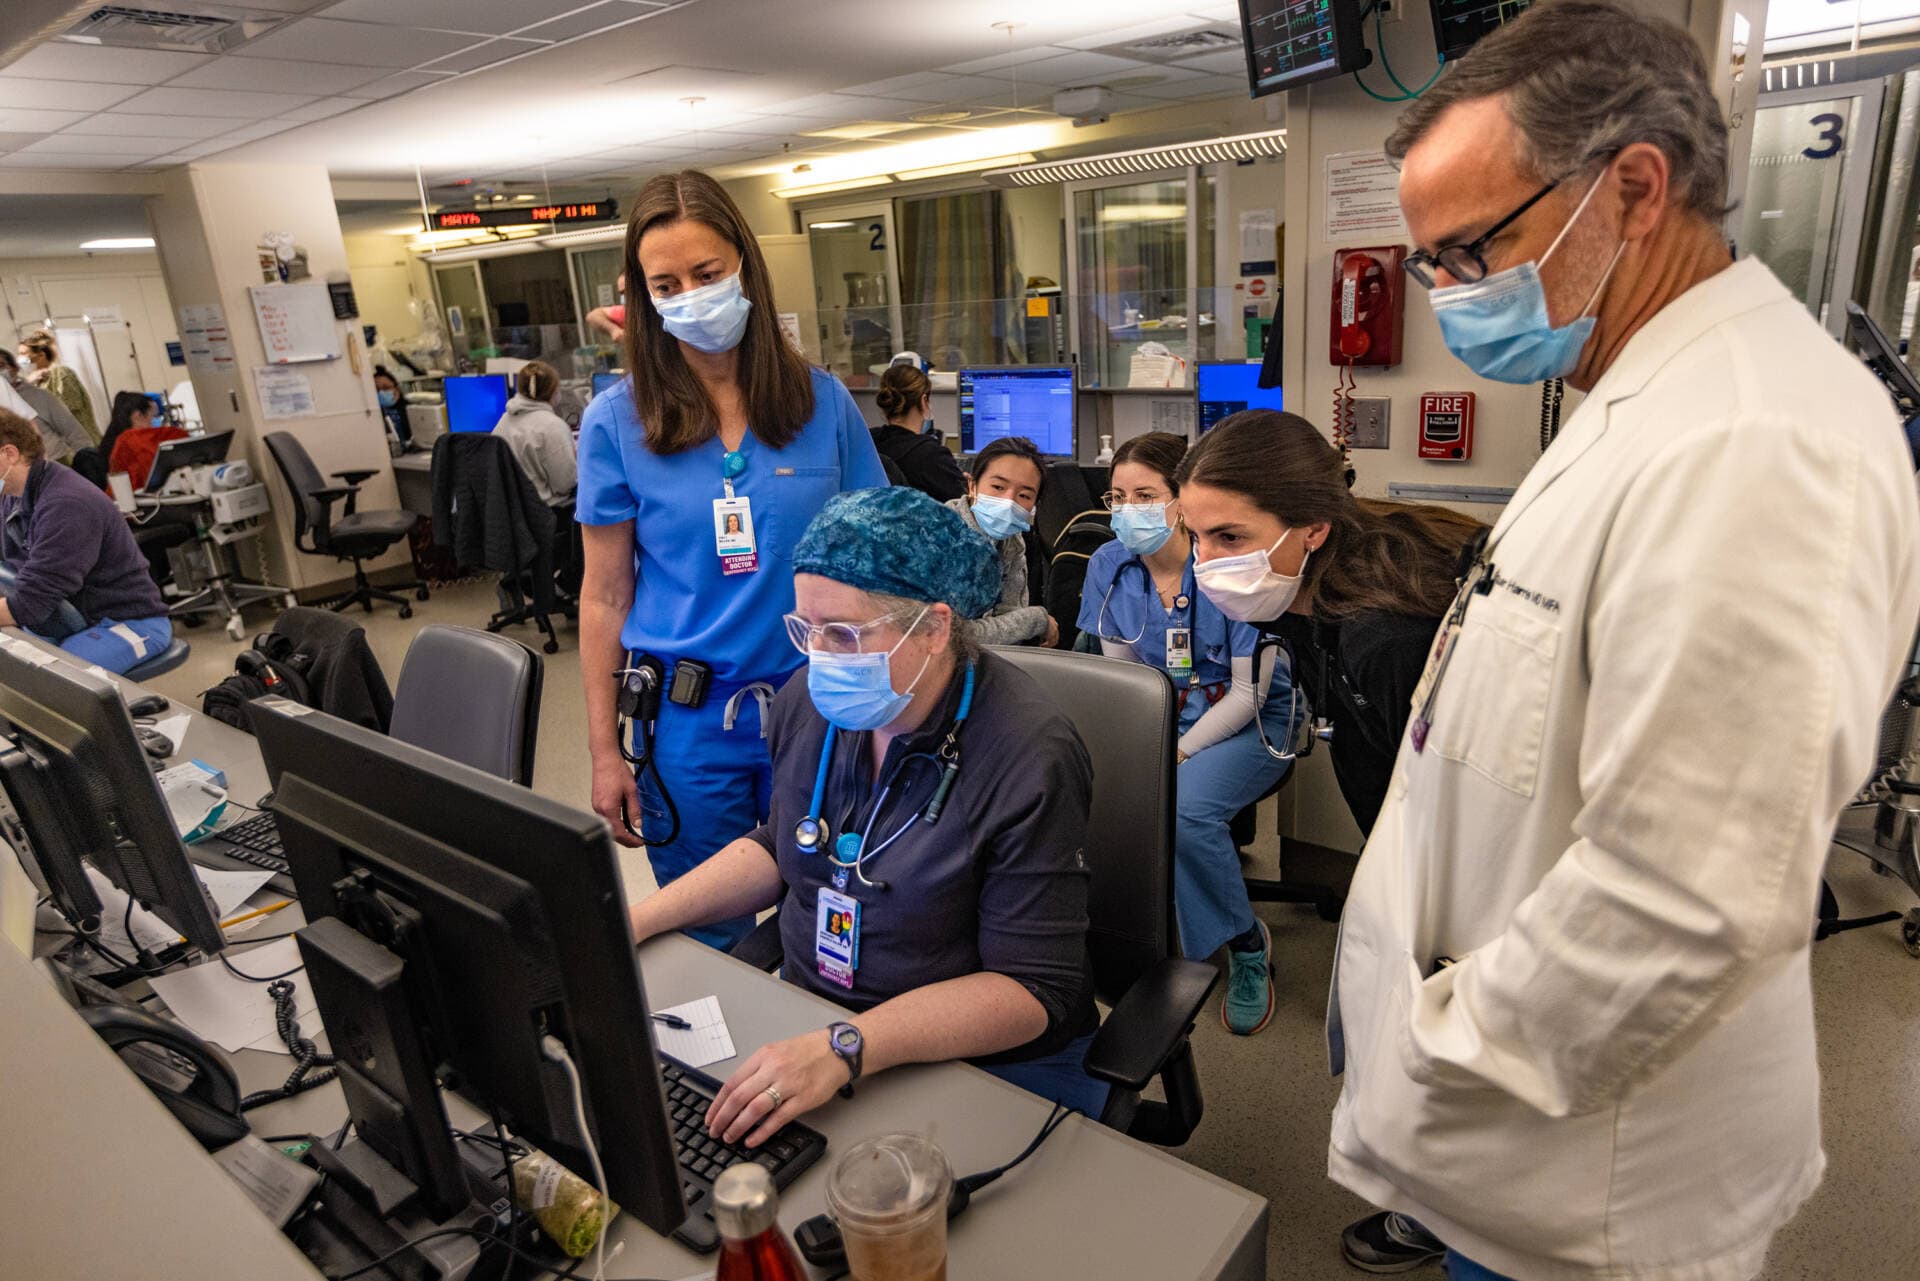 Dr. Emily Miller, left, working with the team in the Department of Emergency Medicine at Massachusetts General Hospital. (Jesse Costa/WBUR)